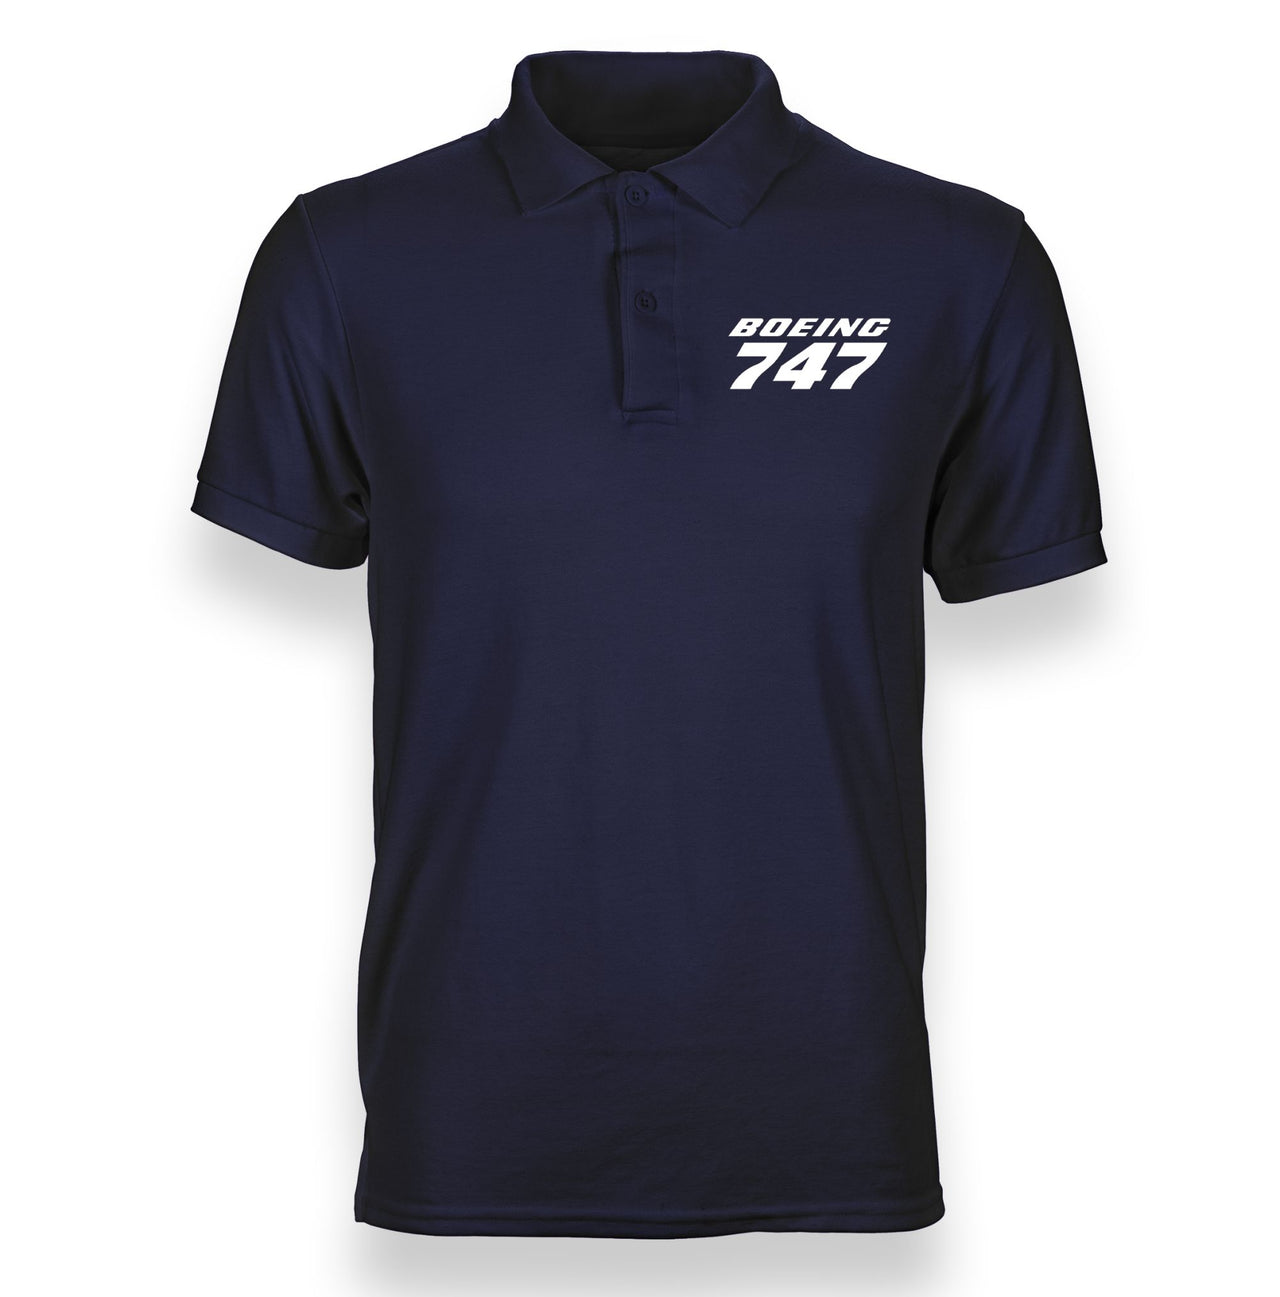 Boeing 747 & Text Designed "WOMEN" Polo T-Shirts